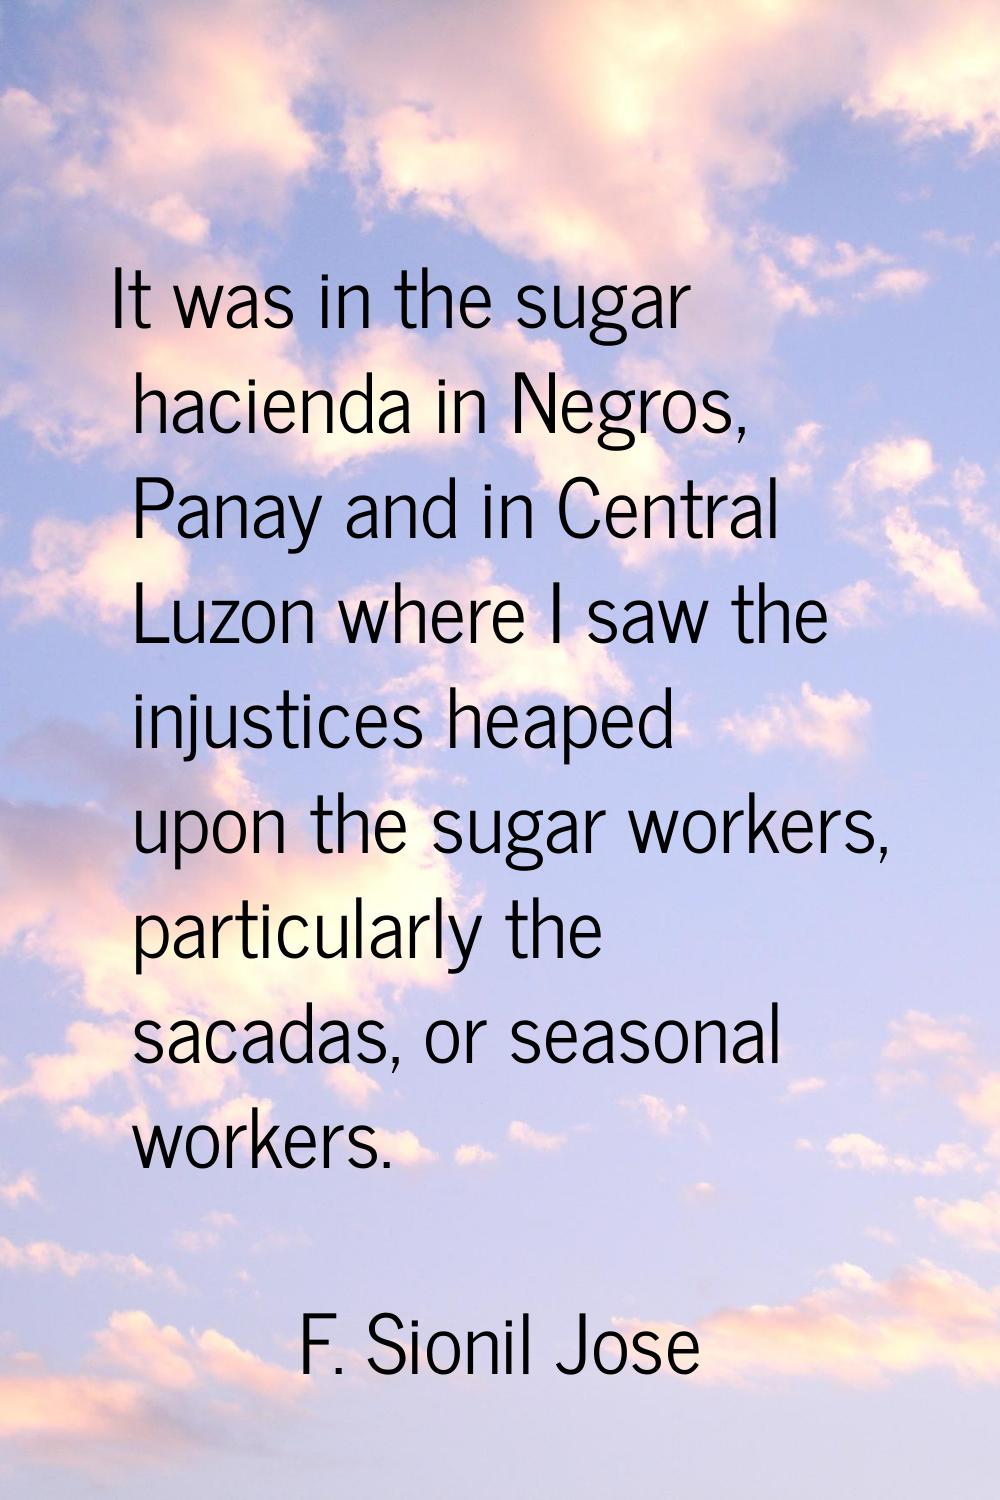 It was in the sugar hacienda in Negros, Panay and in Central Luzon where I saw the injustices heape